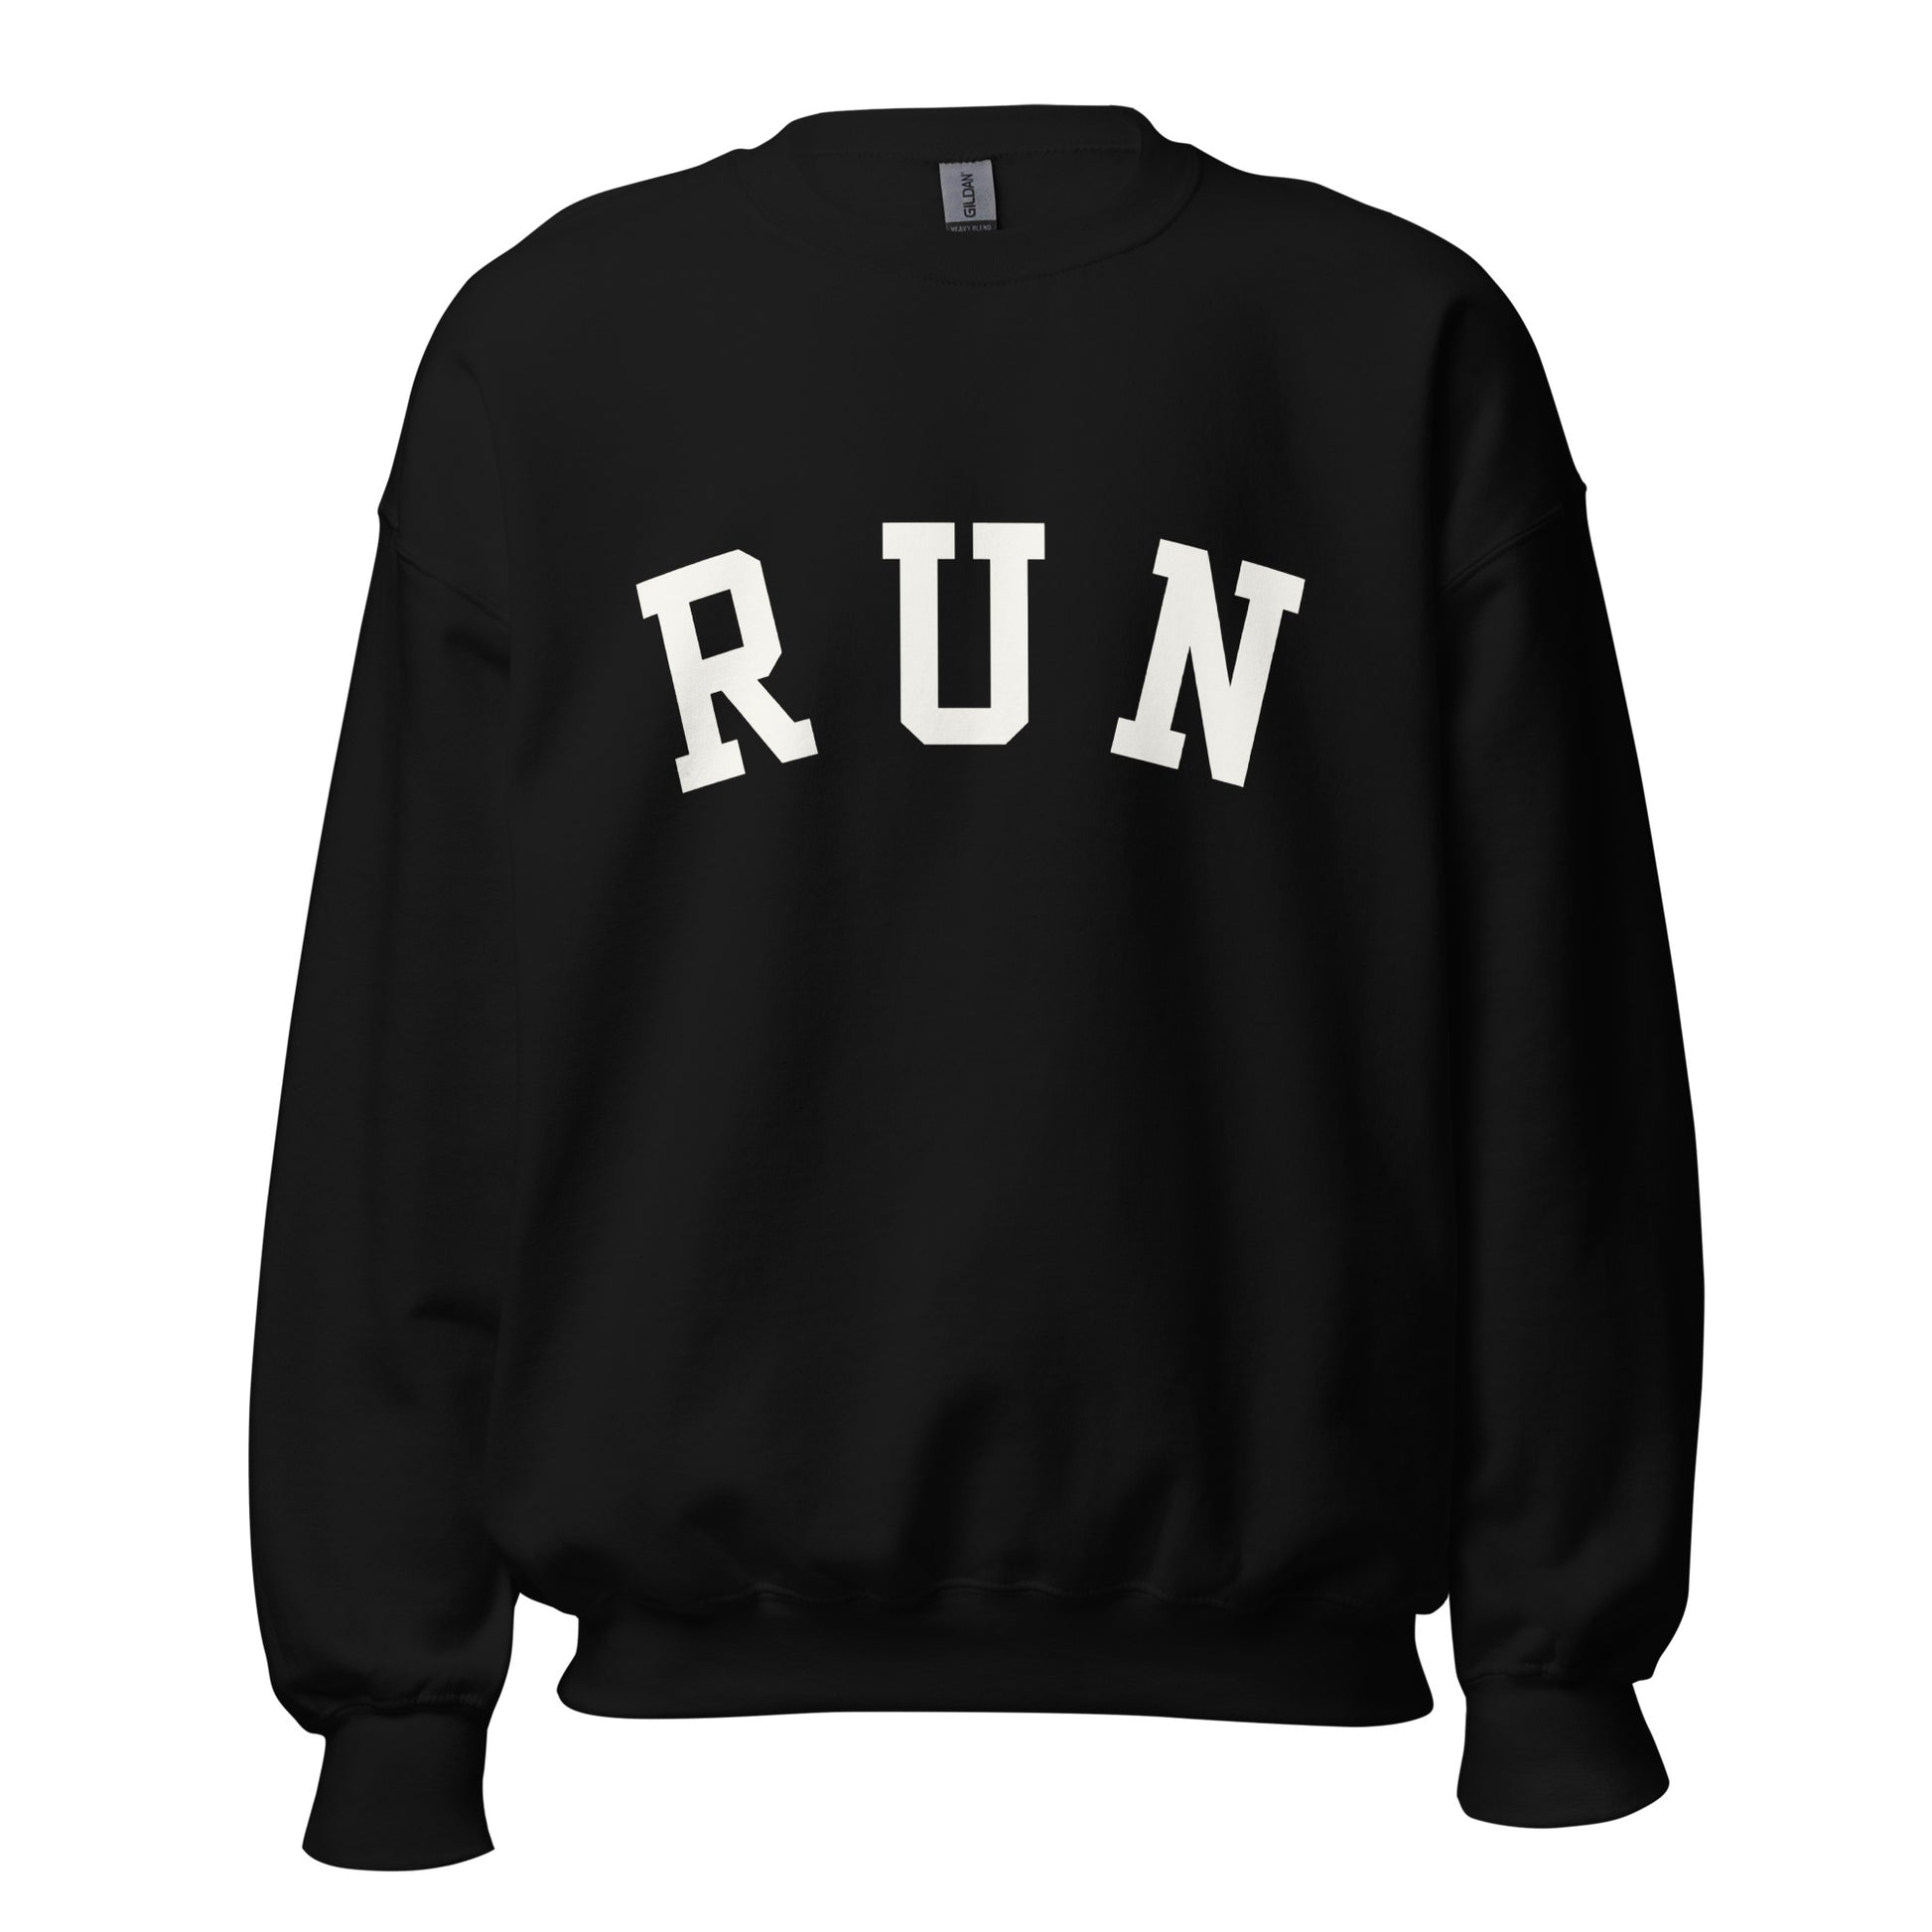 black unisex sweatshirt with the word run across the chest in a bold white varsity style font